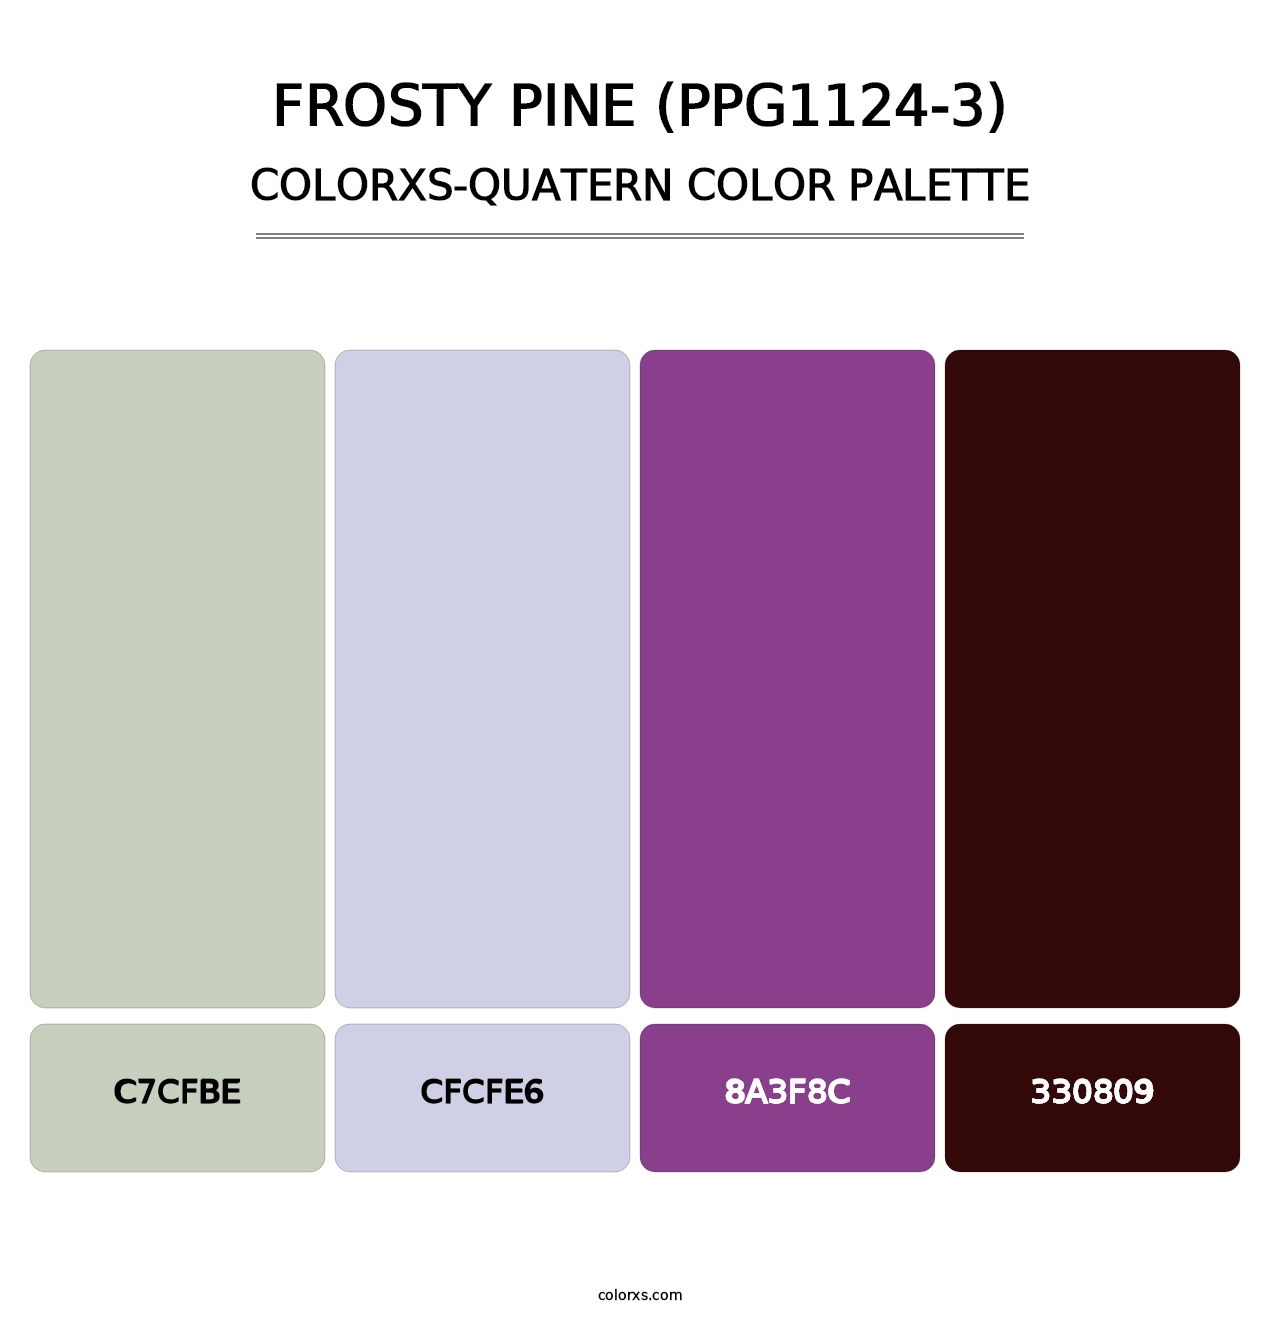 Frosty Pine (PPG1124-3) - Colorxs Quatern Palette